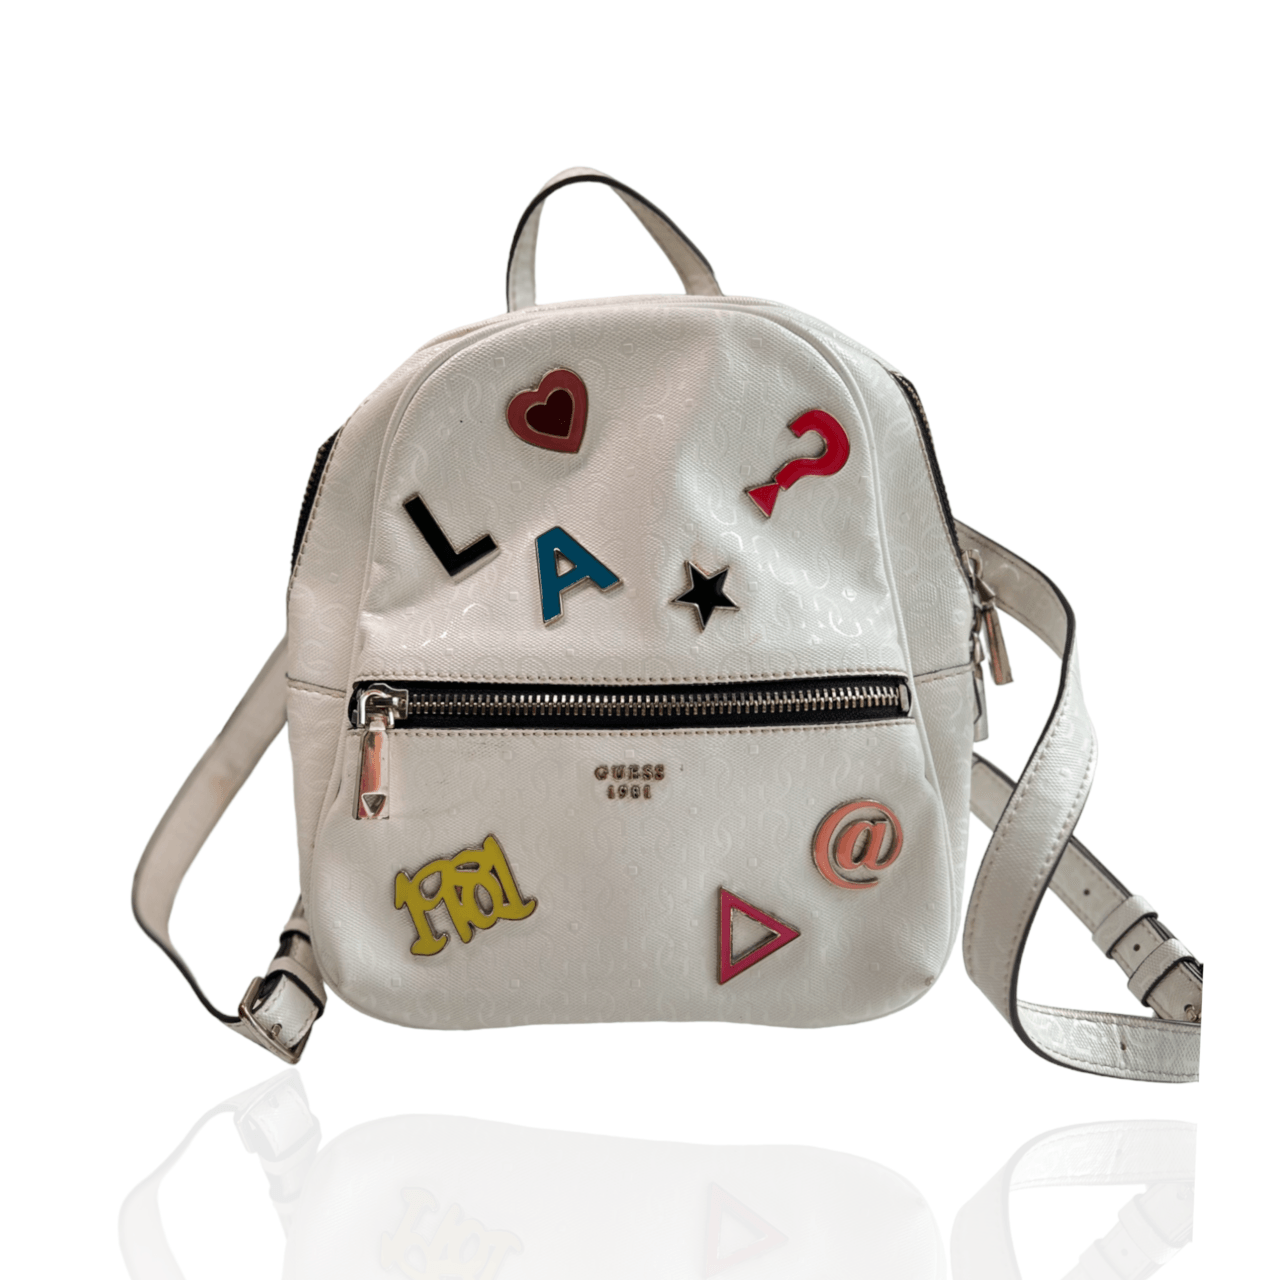 Guess White Backpack